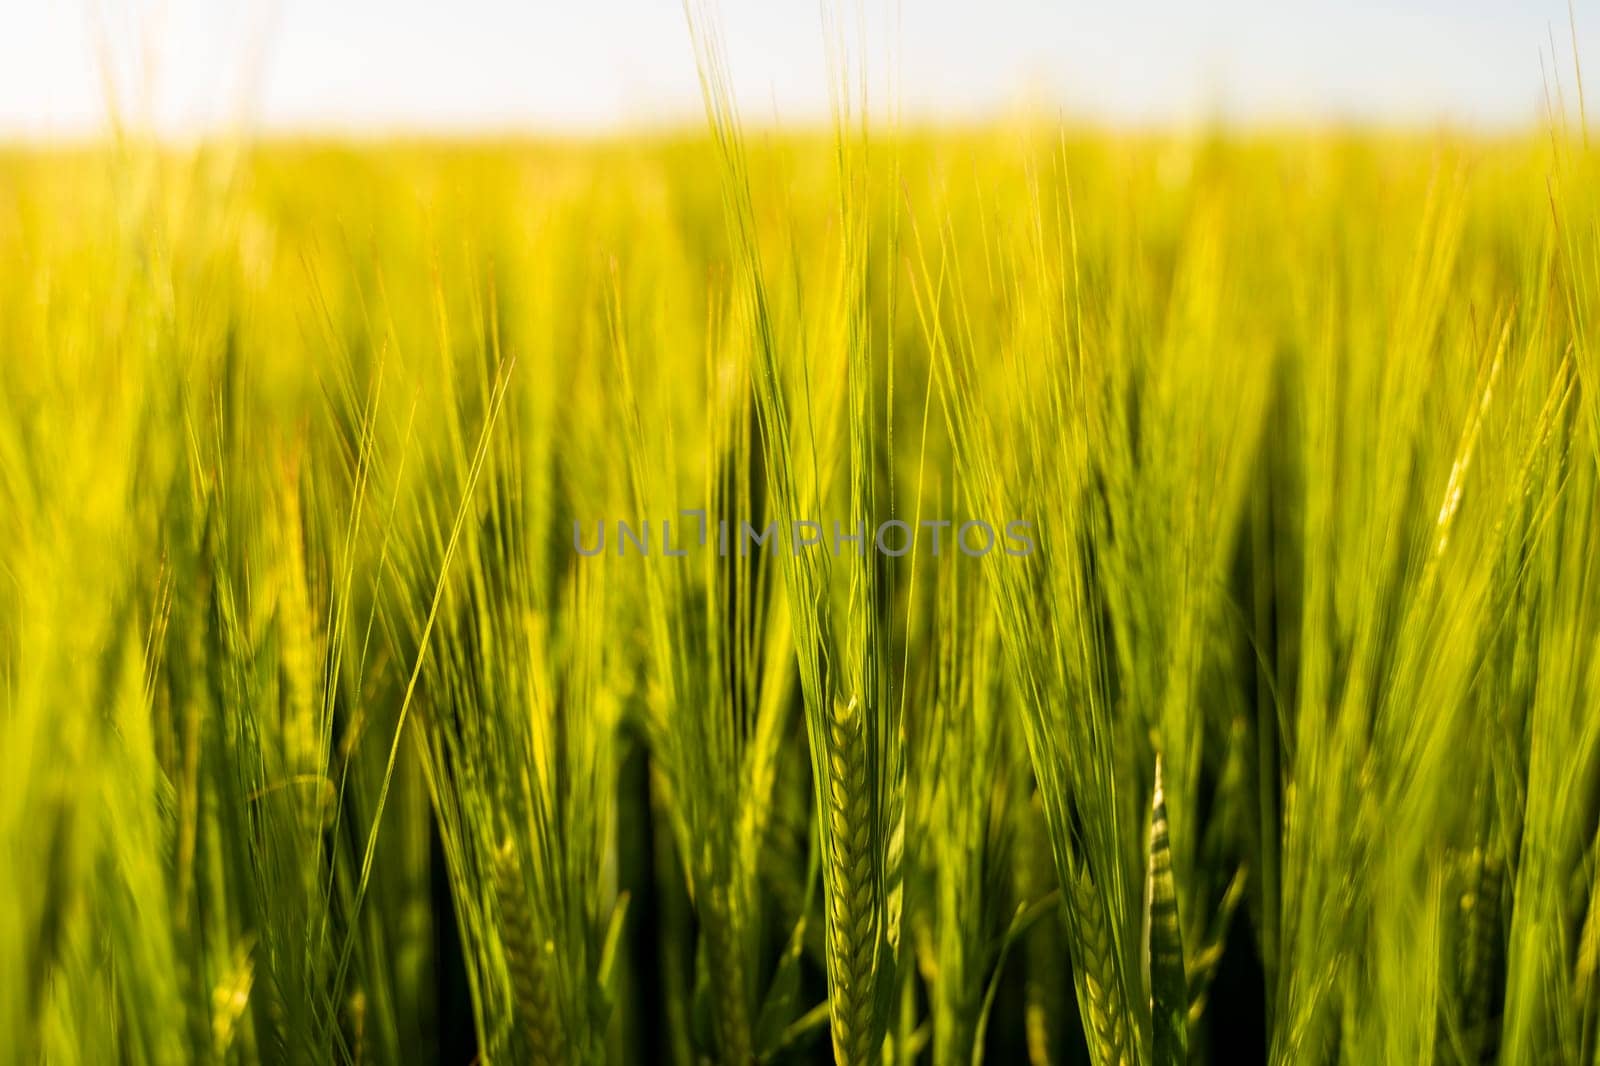 Ears of the green unripe barley. Agricultural field